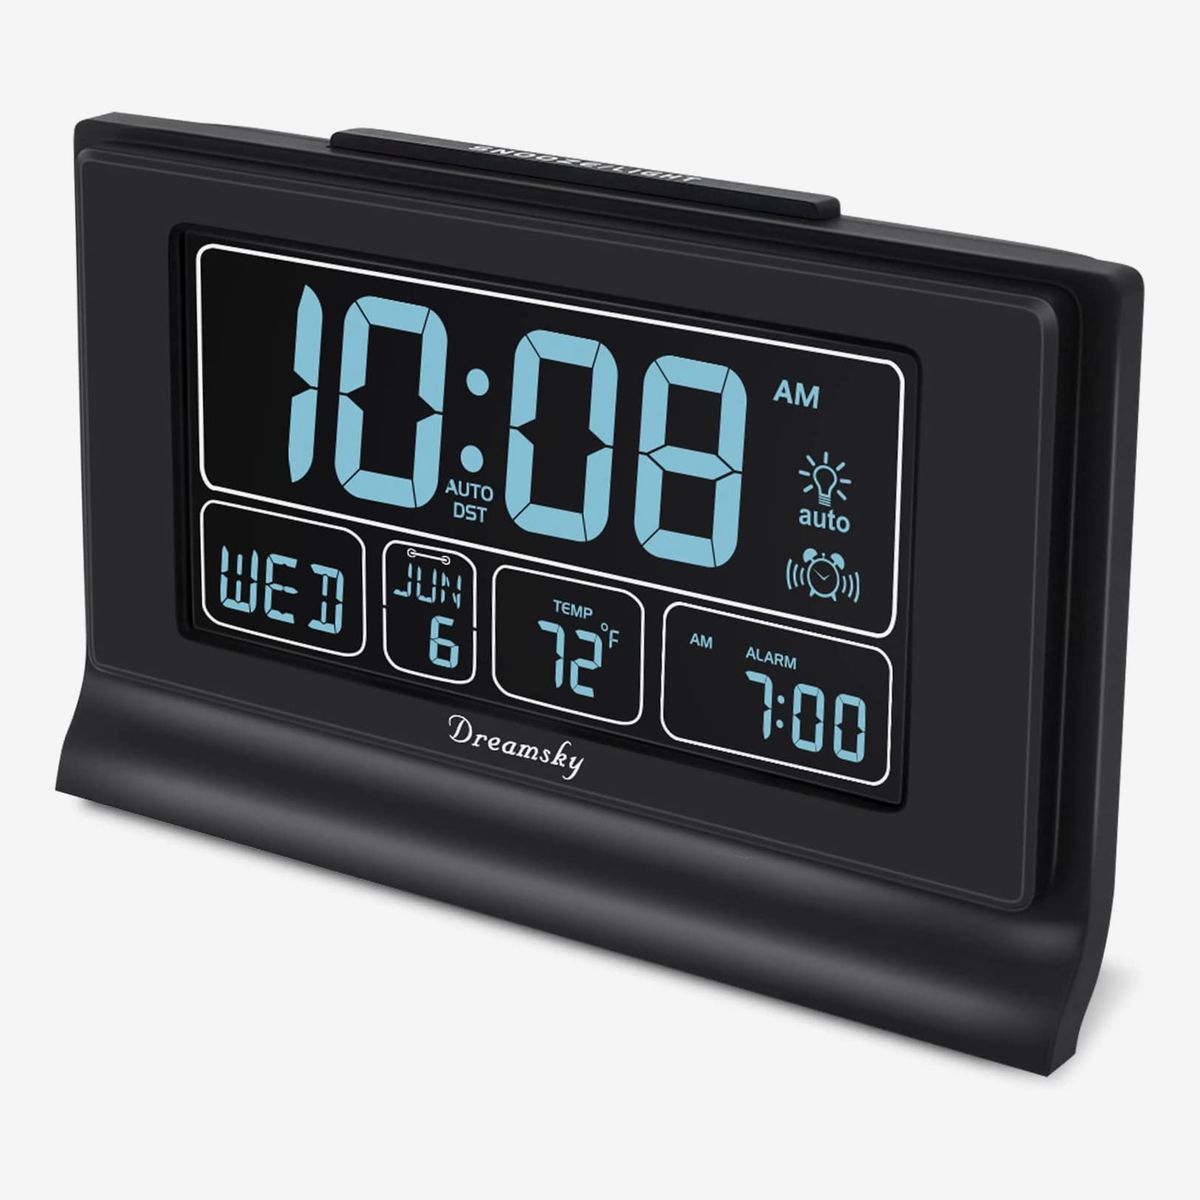 EXTRA LOUD BATTERY OPERATED LCD ALARM CLOCK wake up on time!!! 